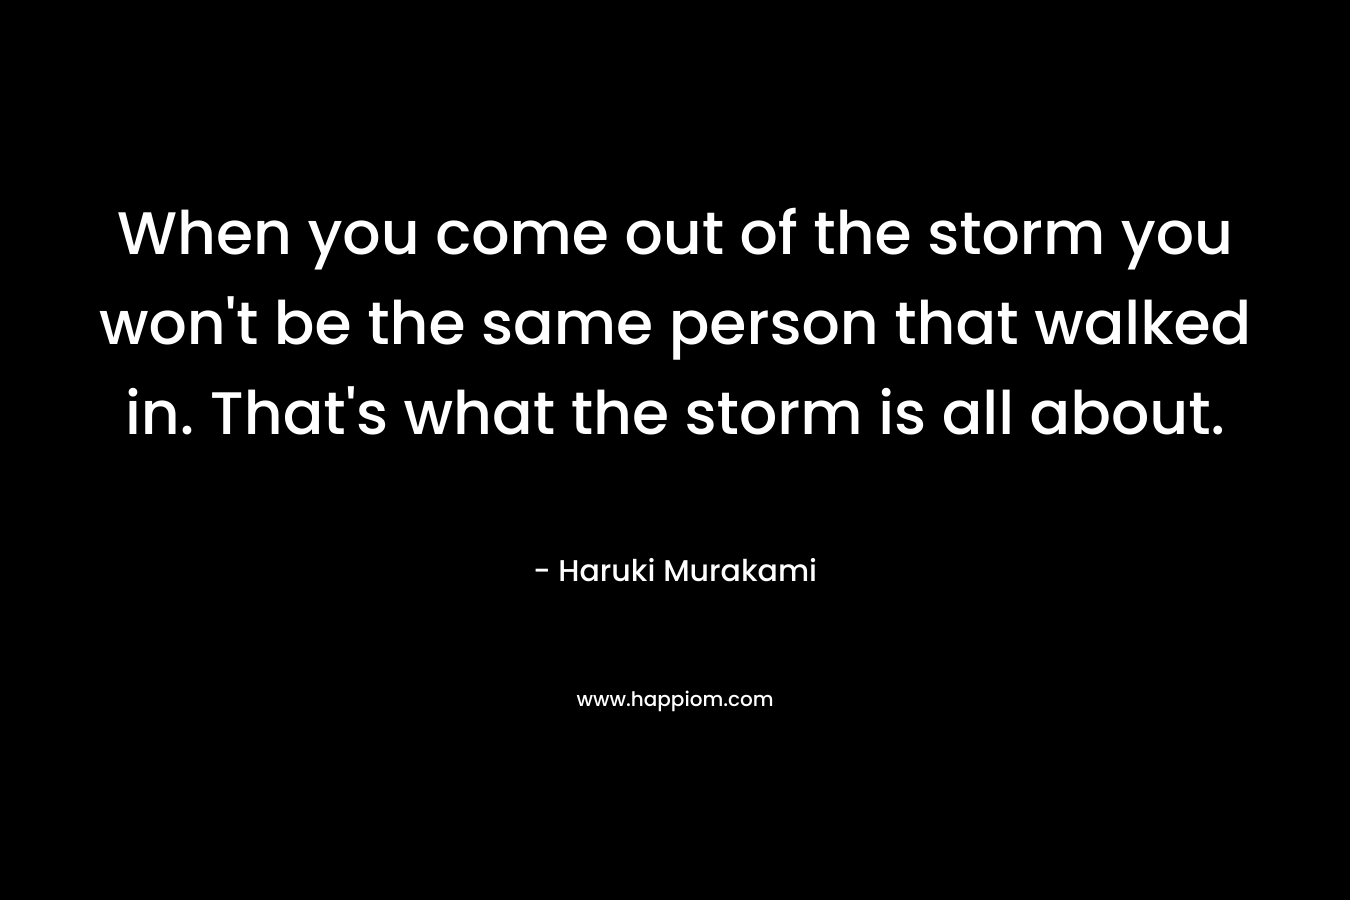 When you come out of the storm you won't be the same person that walked in. That's what the storm is all about.